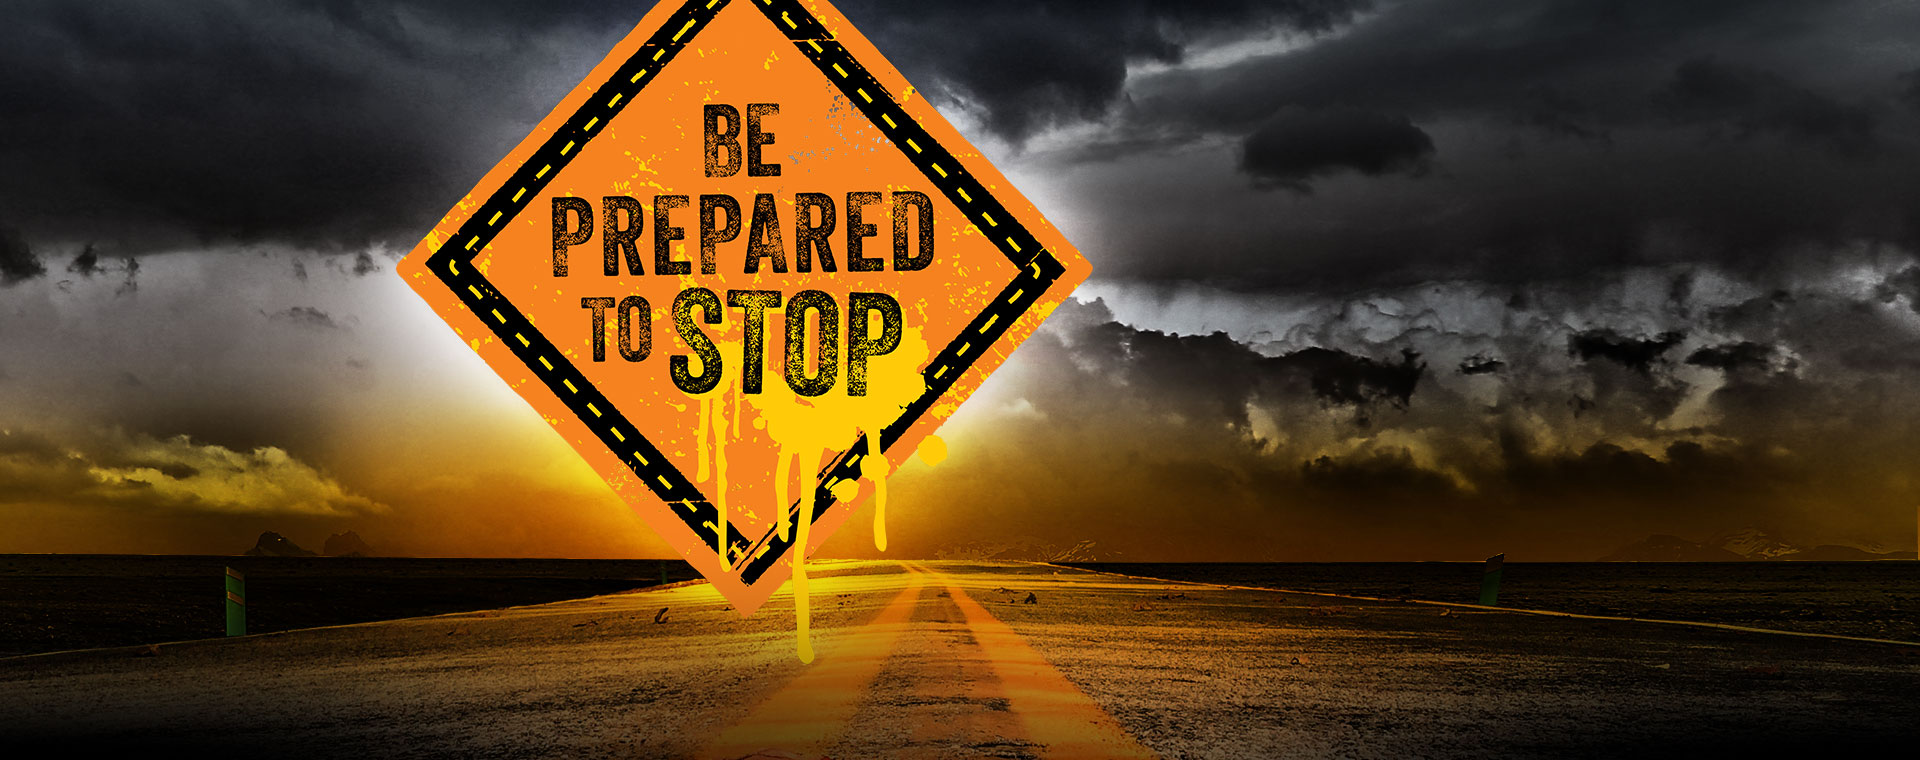 Be Prepared to Stop - April 4, 2018 at The Little Theatre